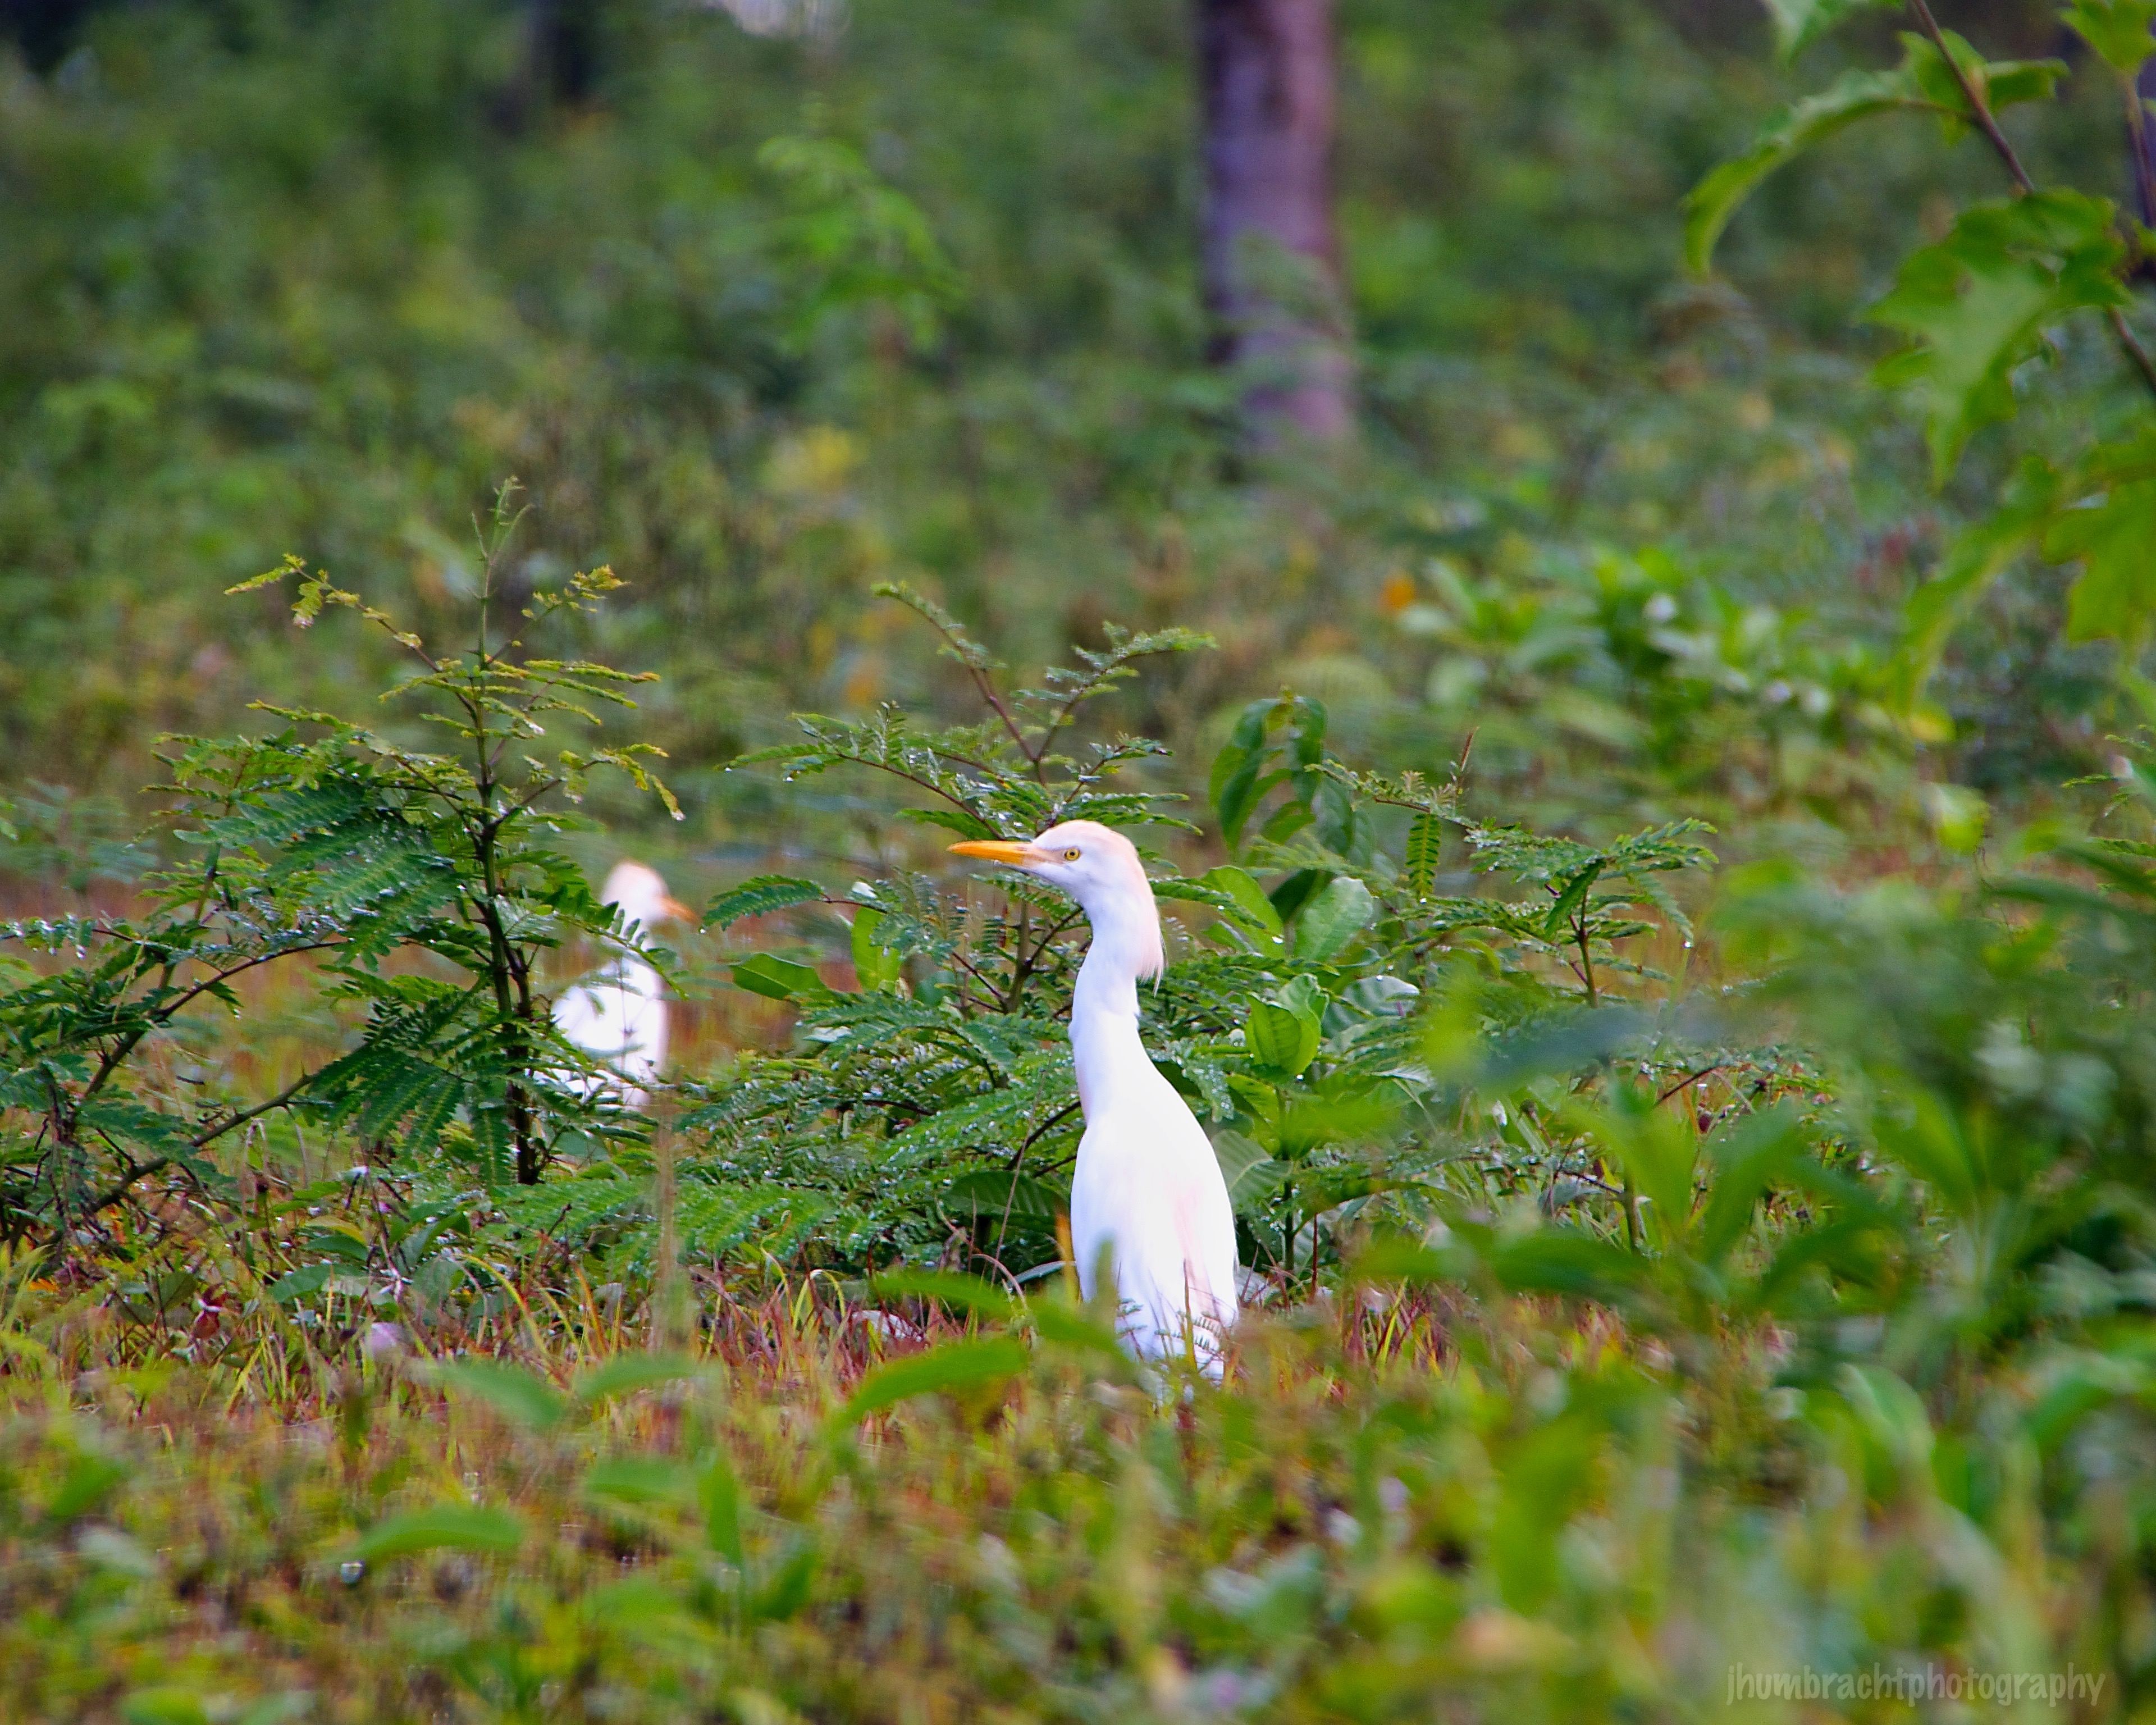 Cattle Egret | Birds of Central America | Image By Indianapolis-based Architectural Photographer Jason Humbracht in 2015